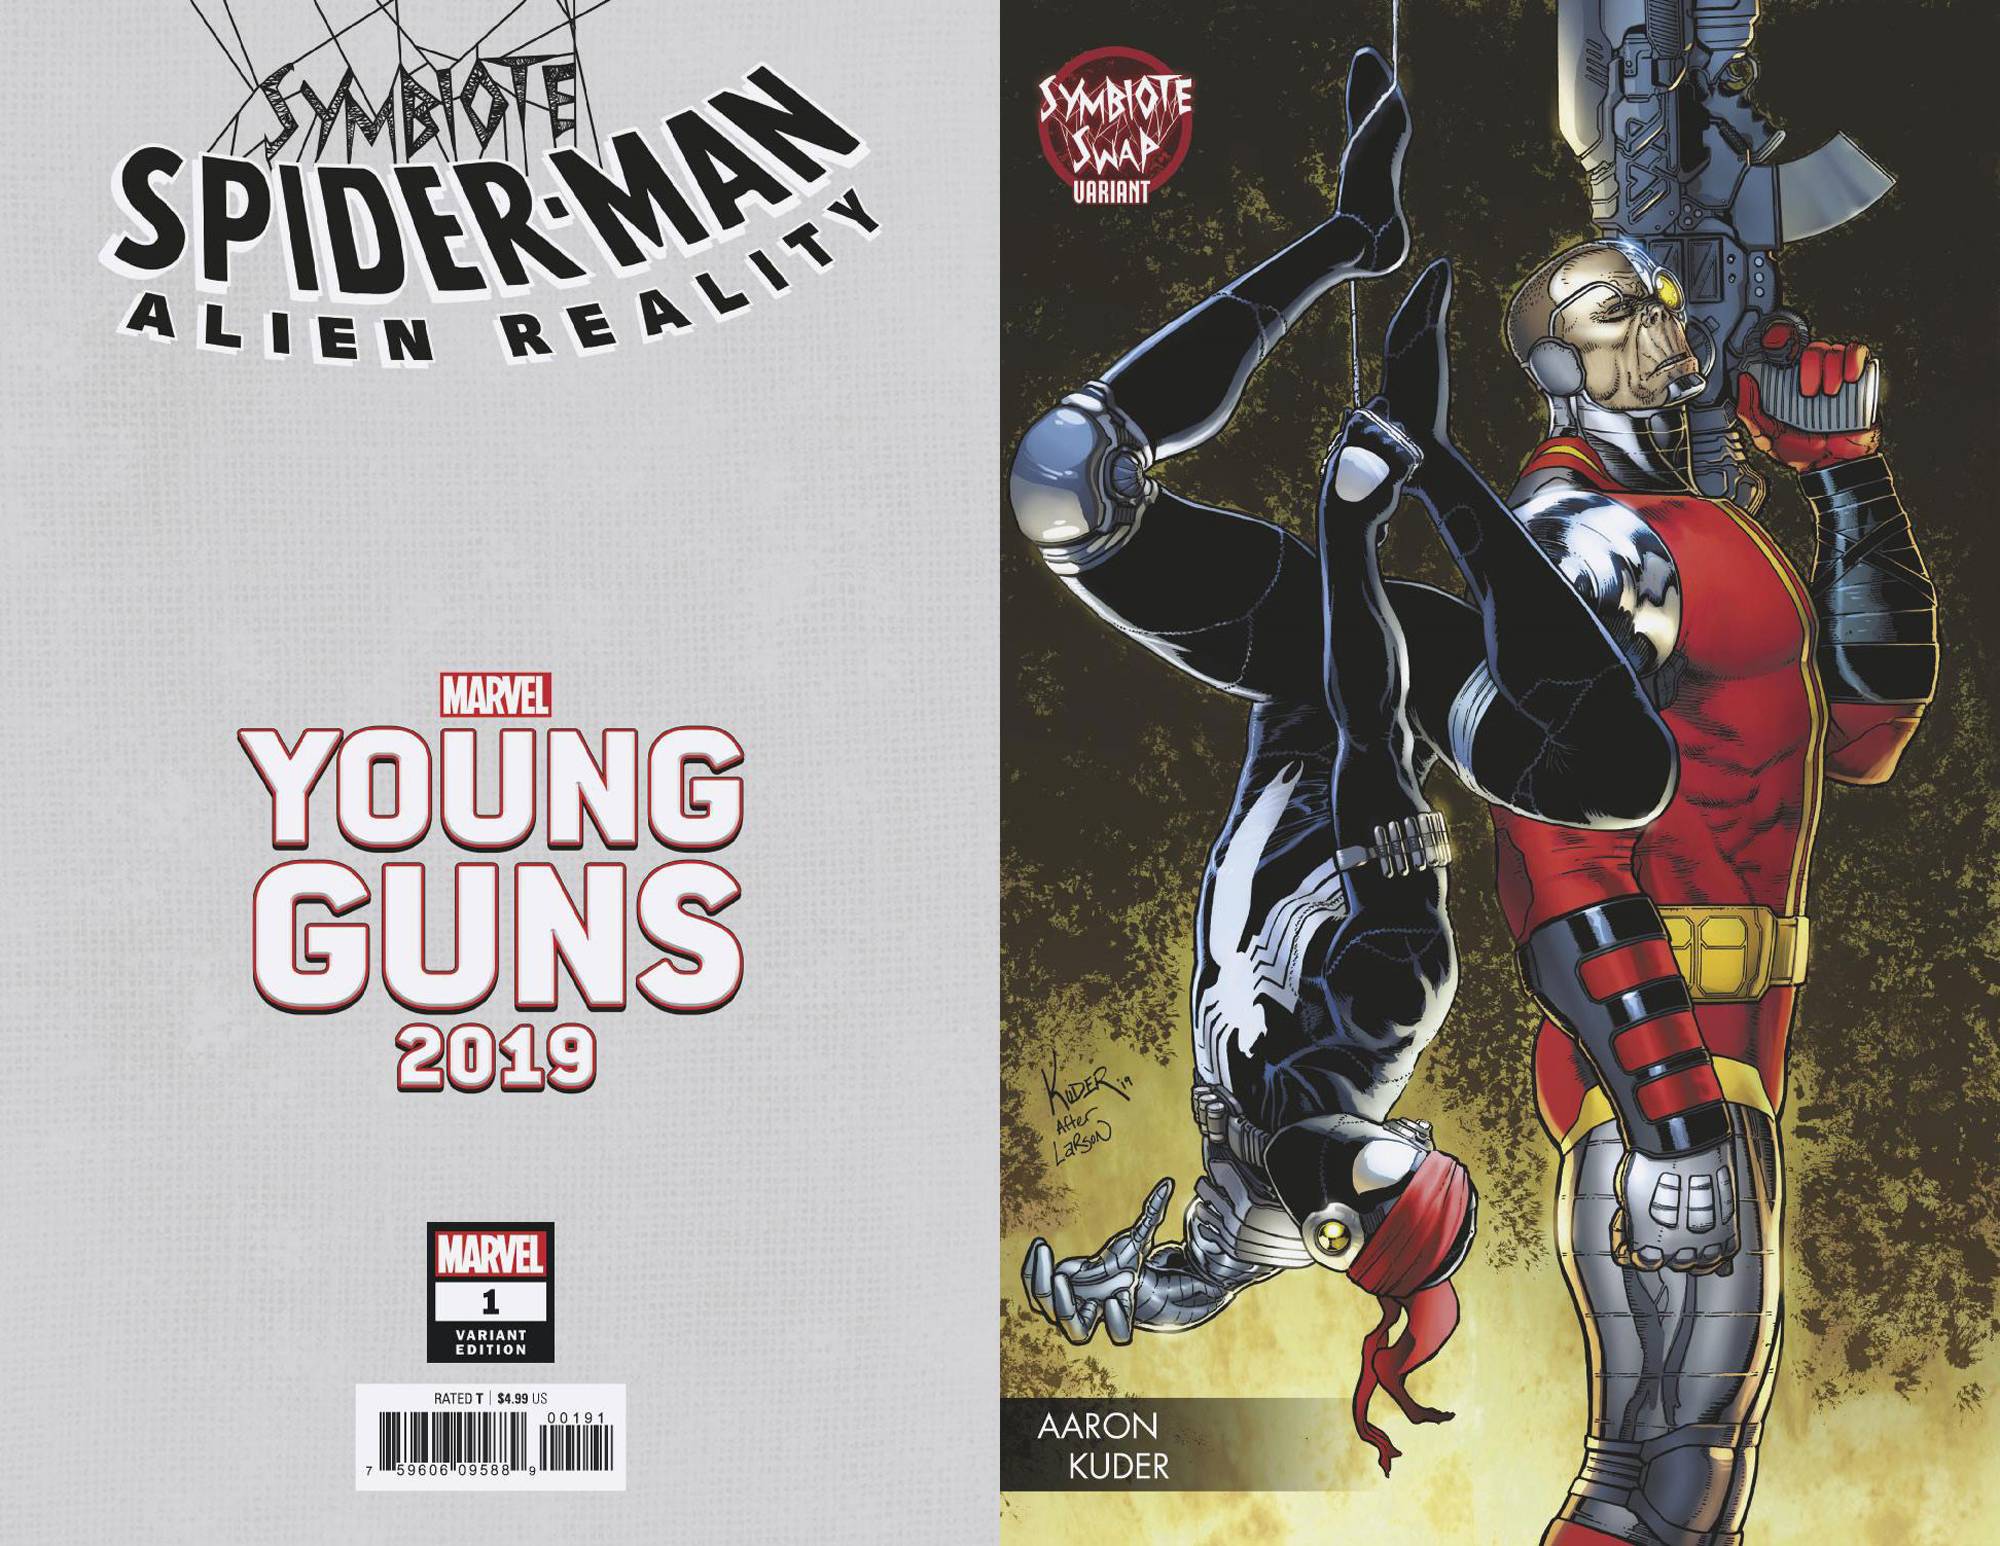 Symbiote Spider-Man Alien Reality #1 Kuder Young Guns Variant (Of 5)